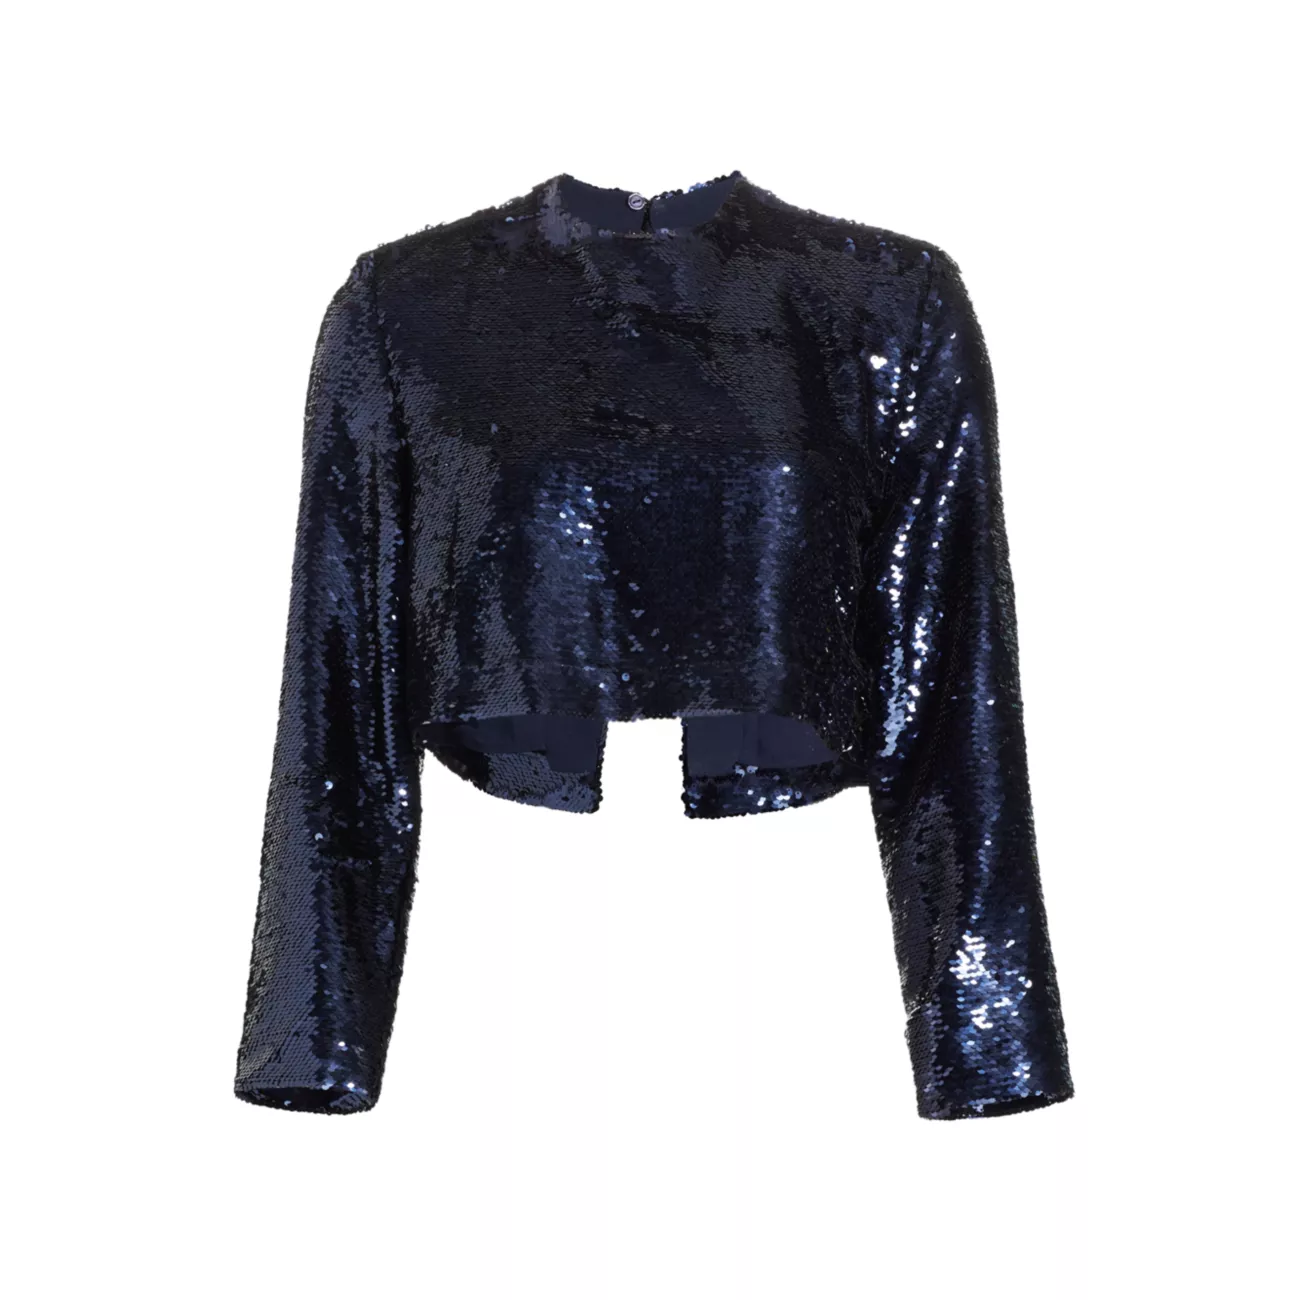 Roll Sequin Cropped Top Sabina Musayev